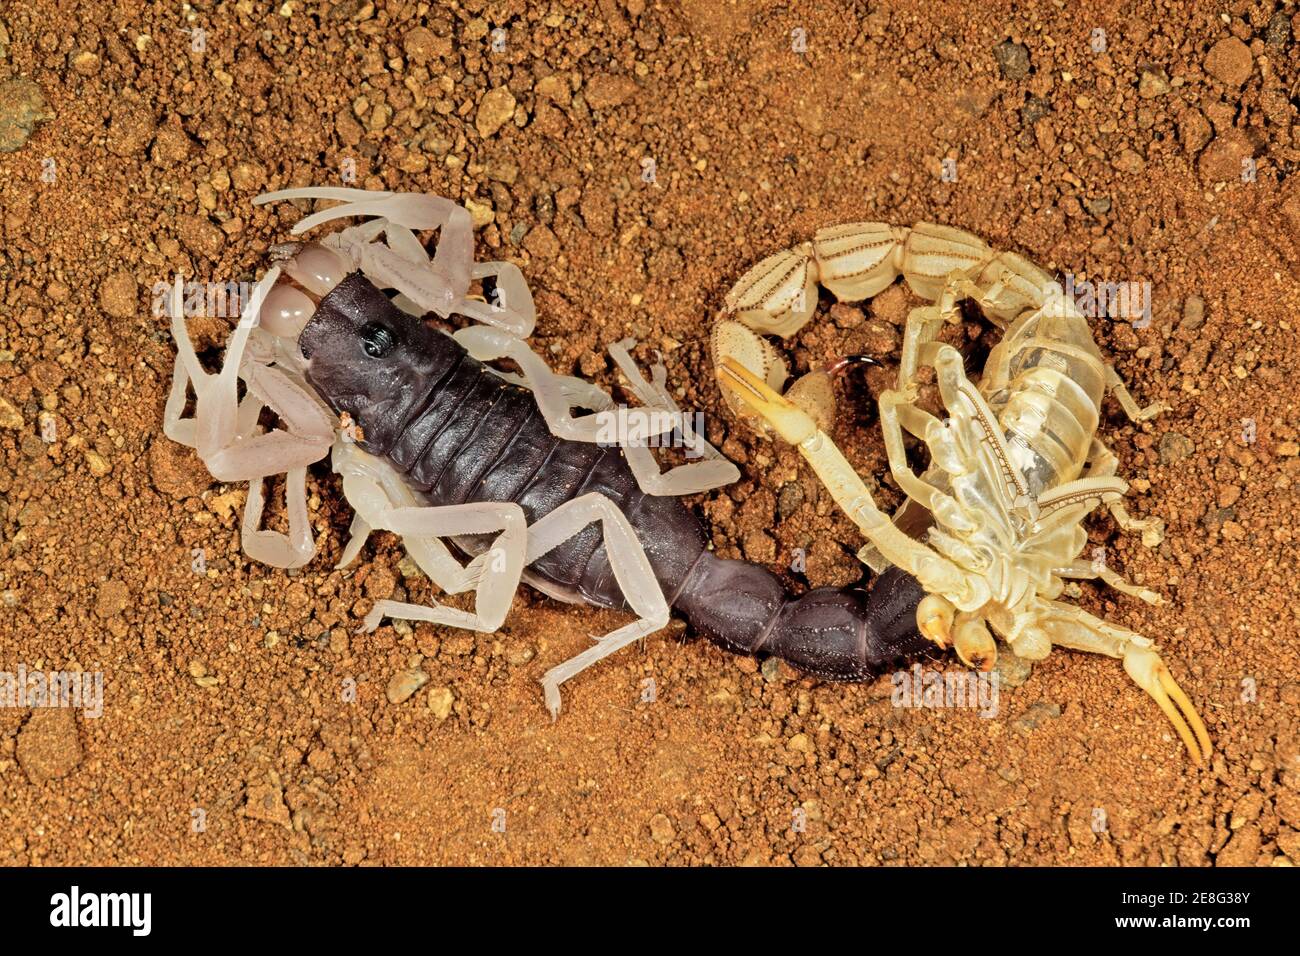 Molting thick-tailed scorpion (Parabuthus spp) with shed skin, South Africa Stock Photo